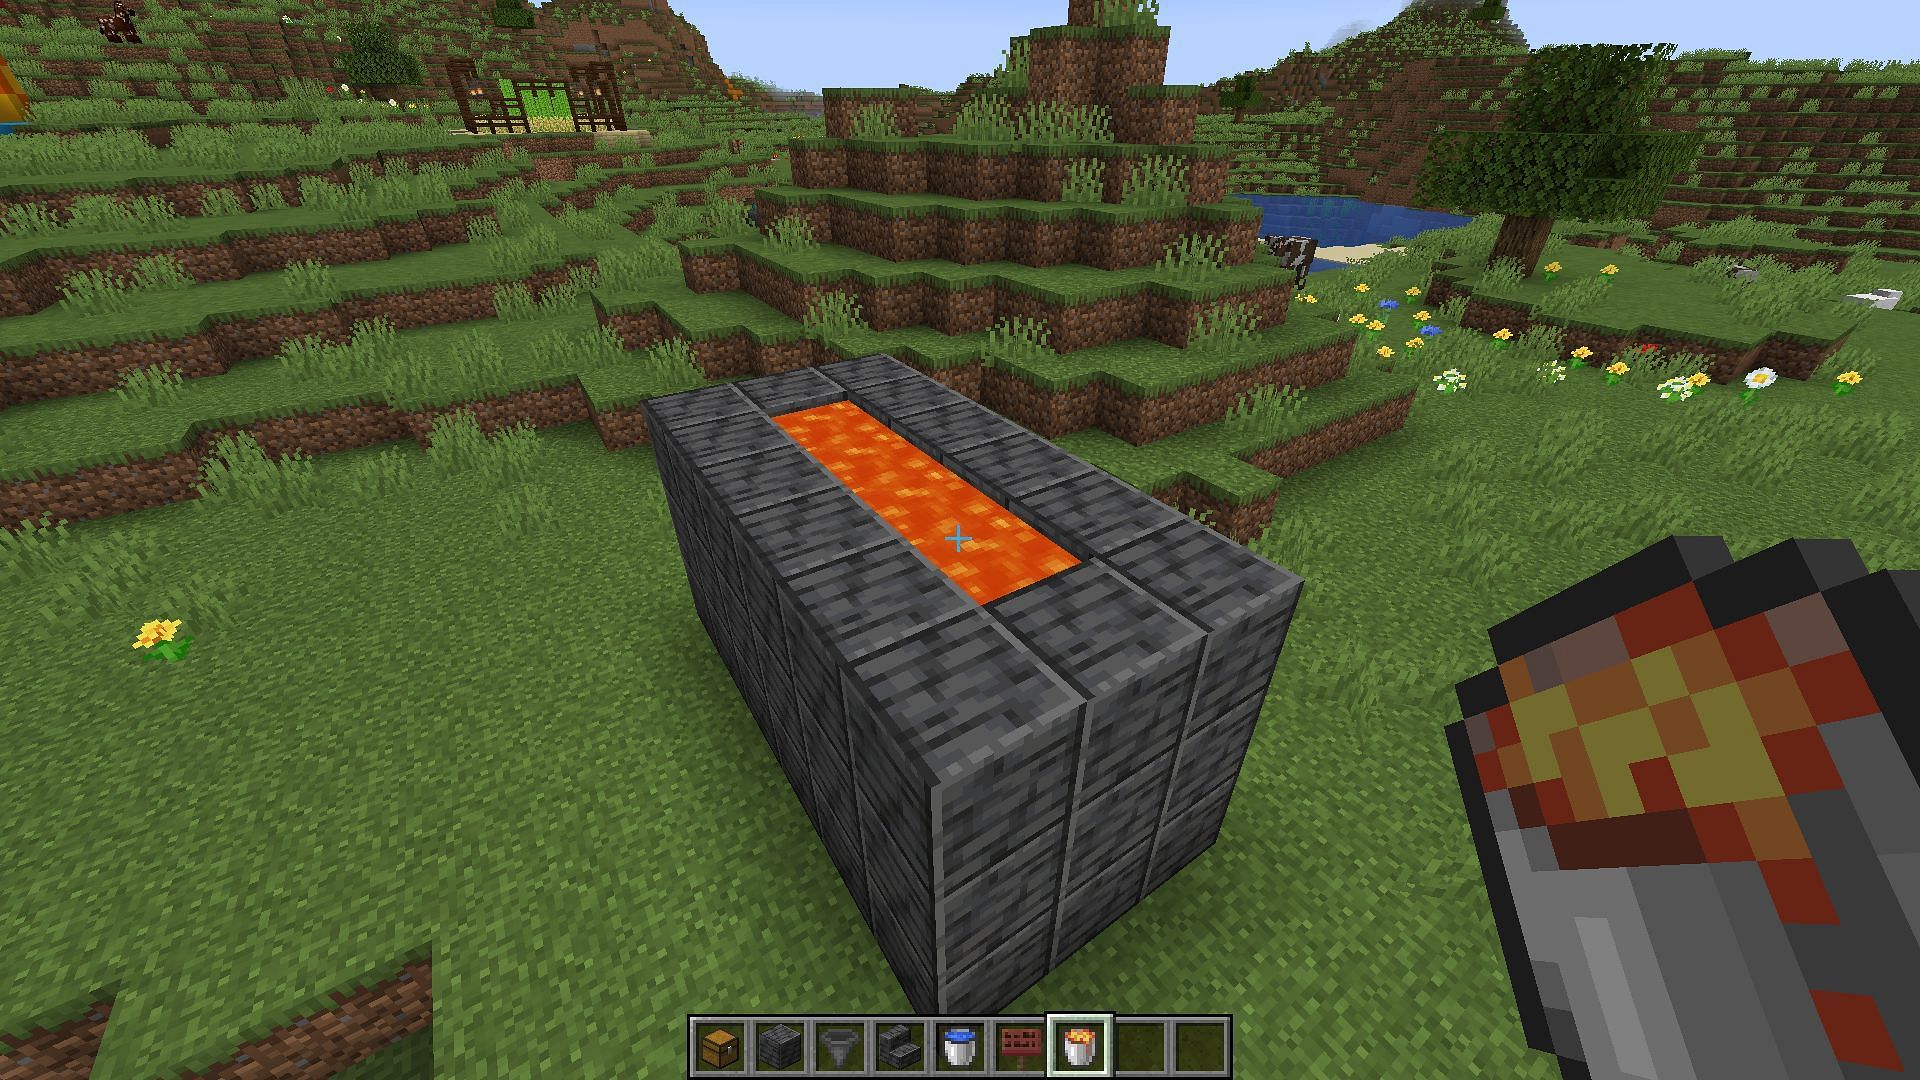 The extra level of foundation is then filled with lava (Image via Minecraft)